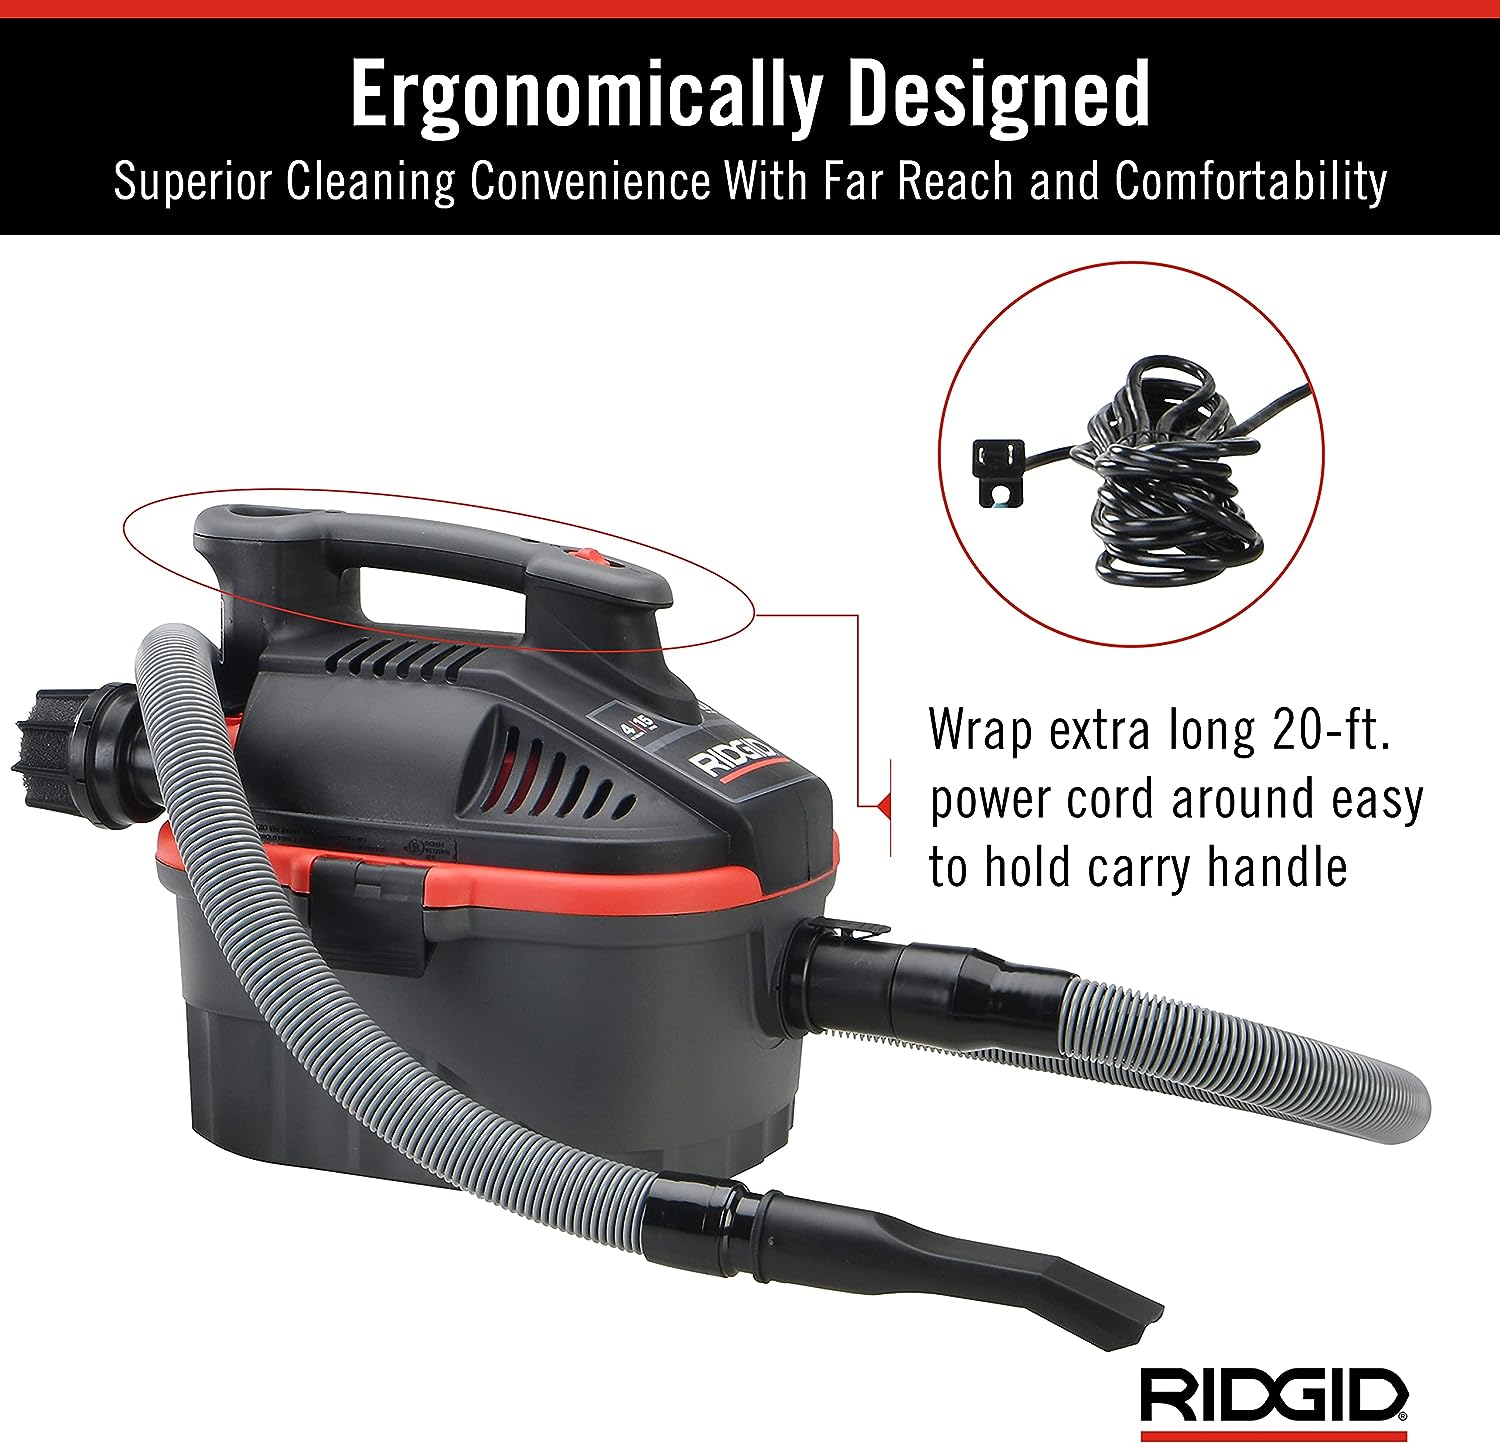 RIDGID 50313 Model 4000RV 4-Gallon Portable Wet and Dry Compact Vacuum  Cleaner with 5.0 Peak-HP Motor, 4 gallon, Red